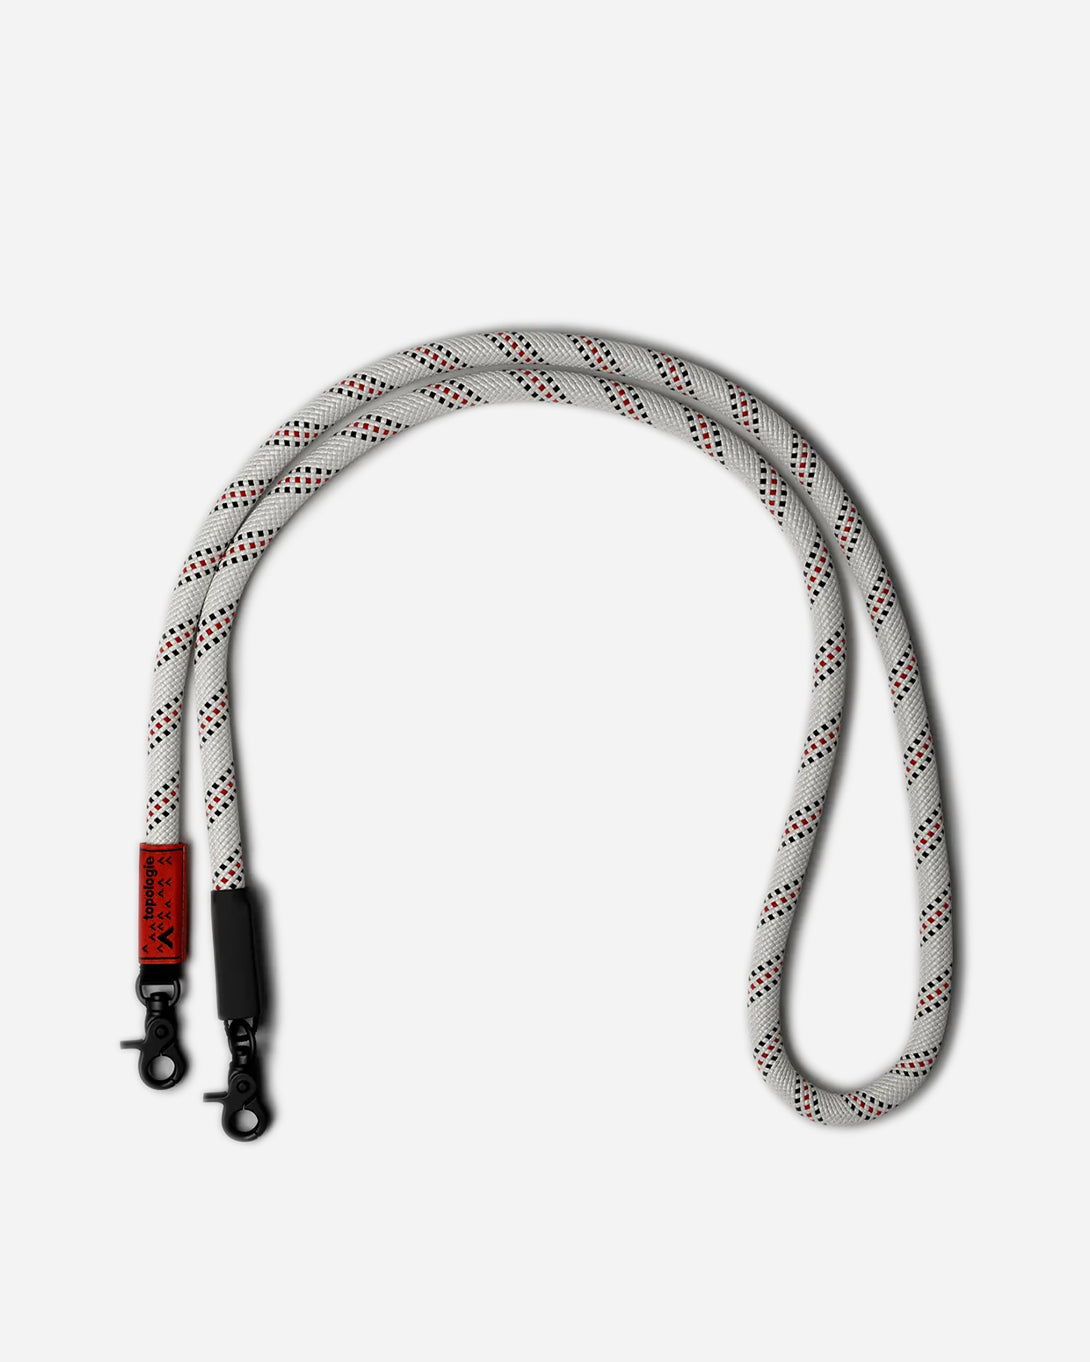 White Patterned Topologie Rope Strap 10mm